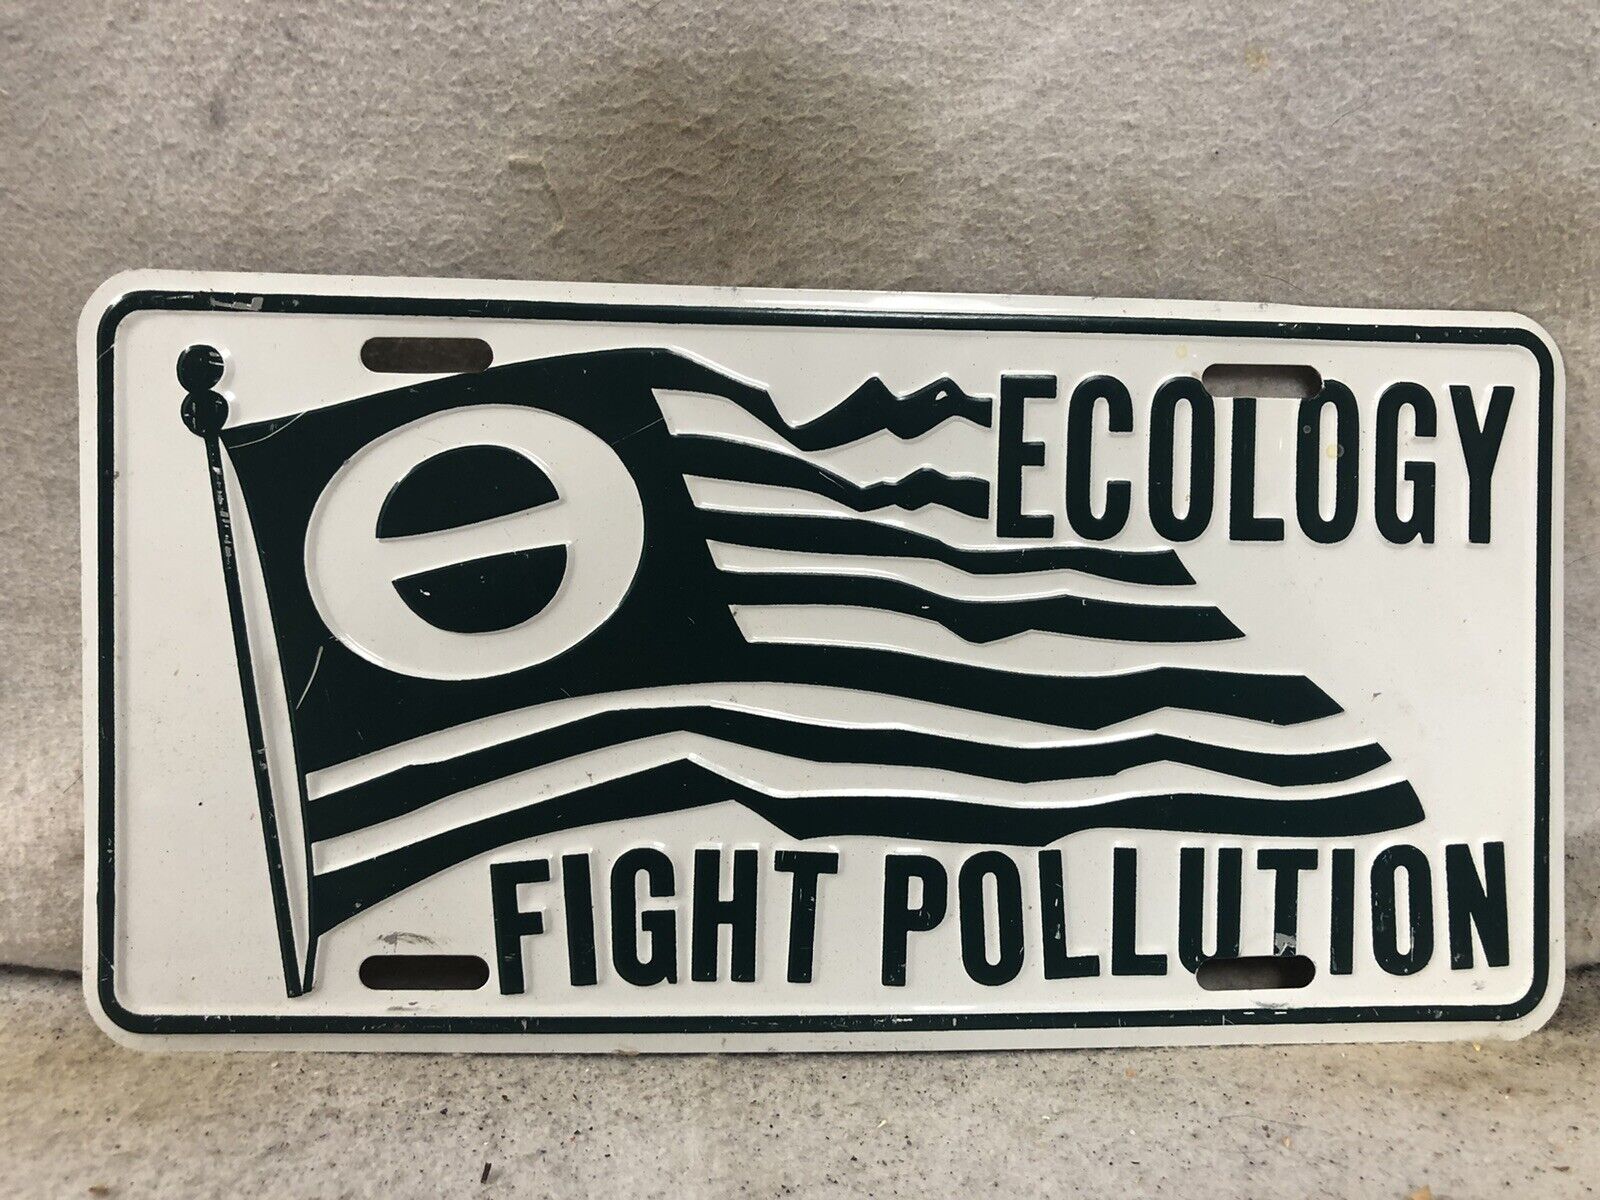 Ecology Fight Pollution License Plate